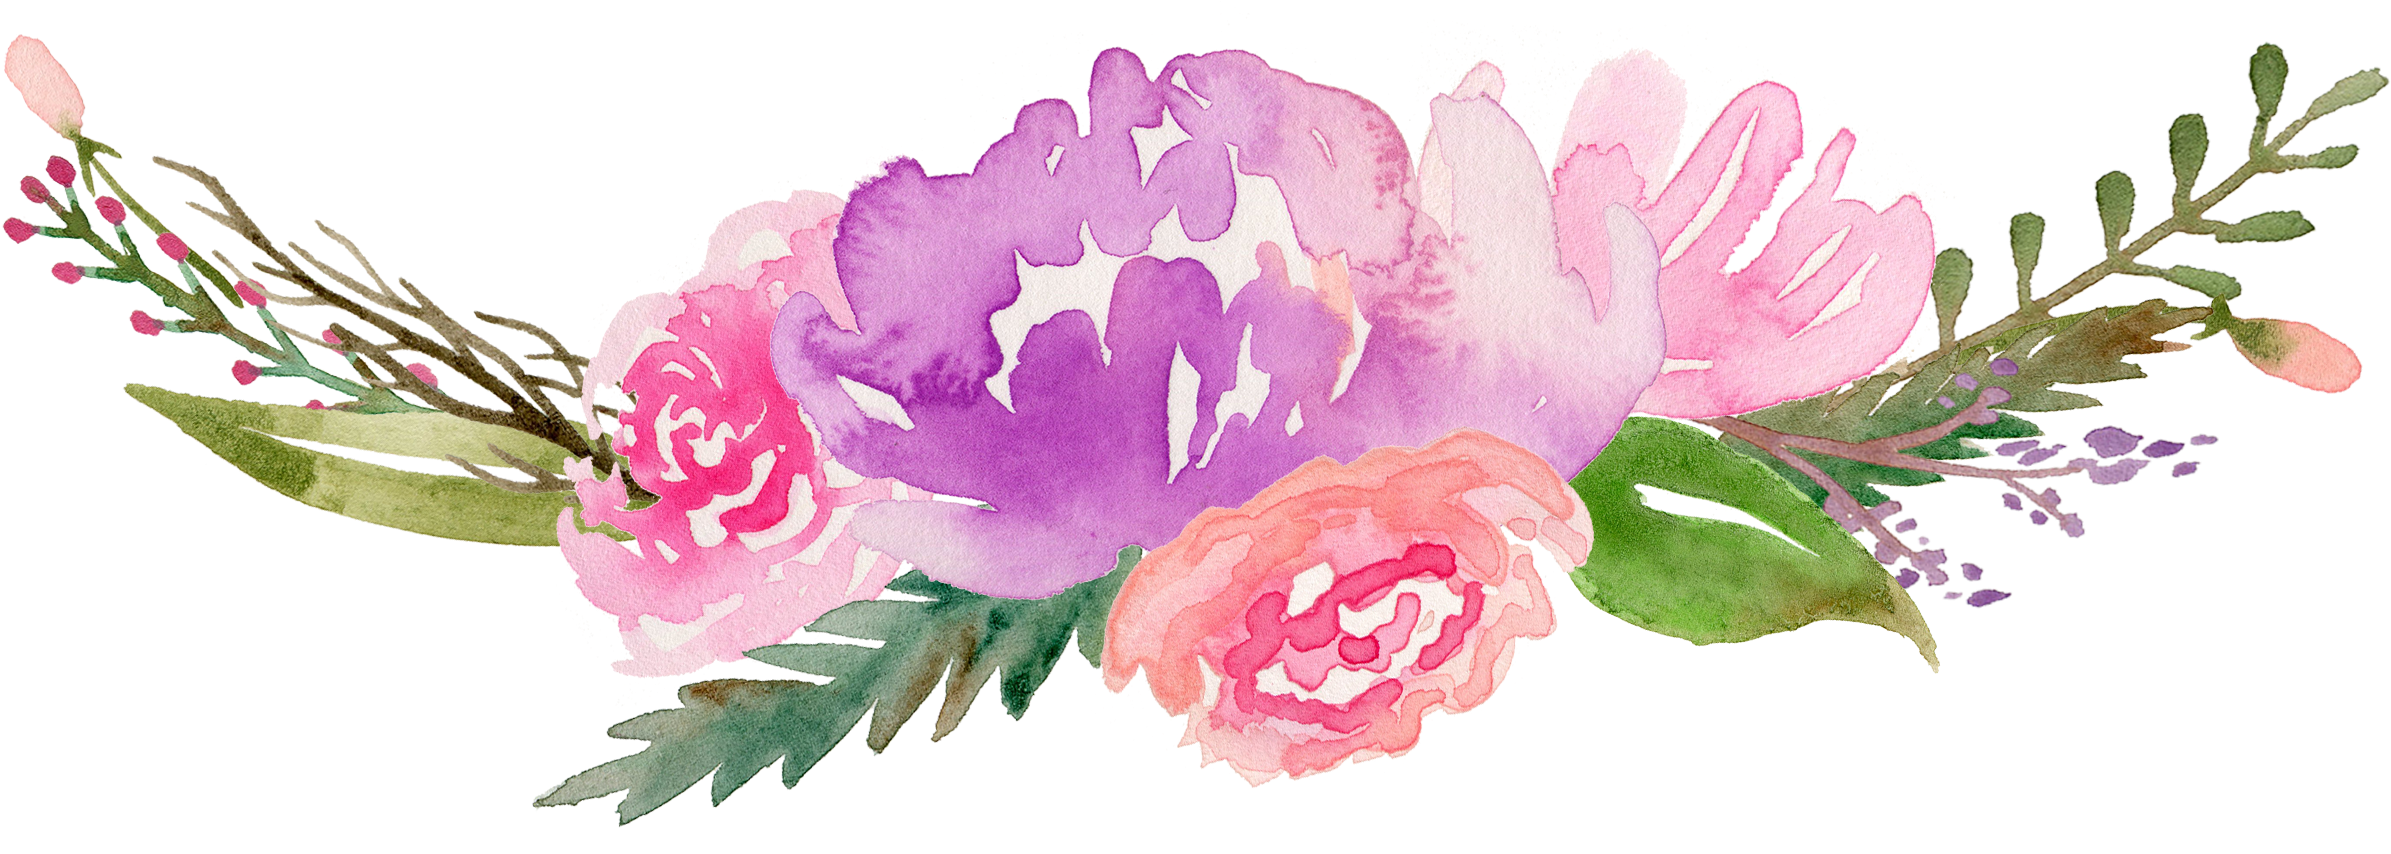 Watercolor Flower Art Pic PNG Image High Quality PNG Image